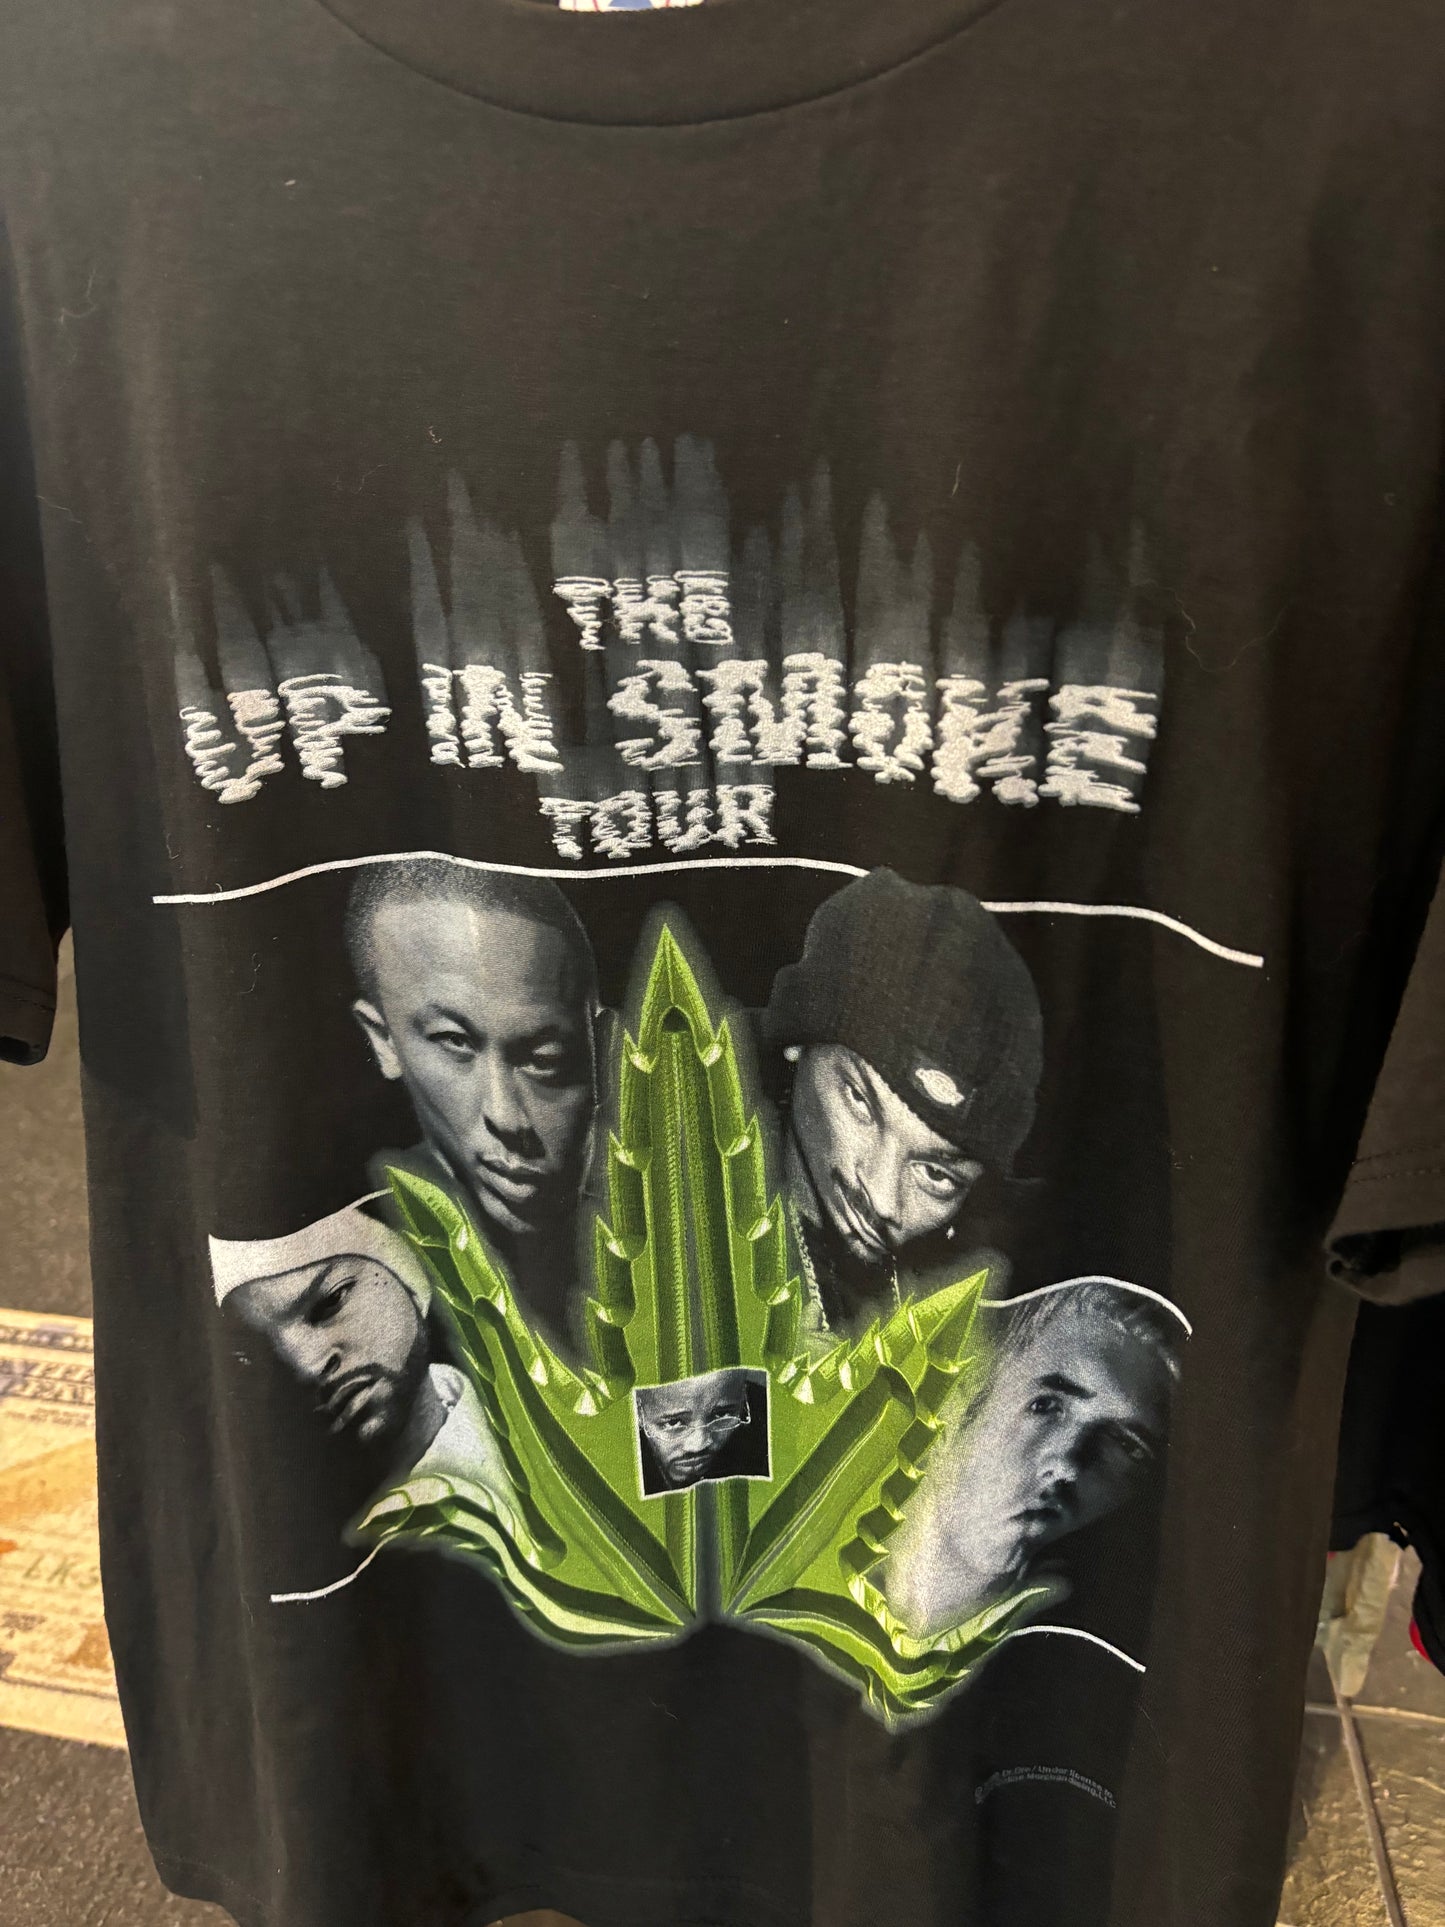 Vintage Up In The Smoke Tour Shirt SZ Med From 2000